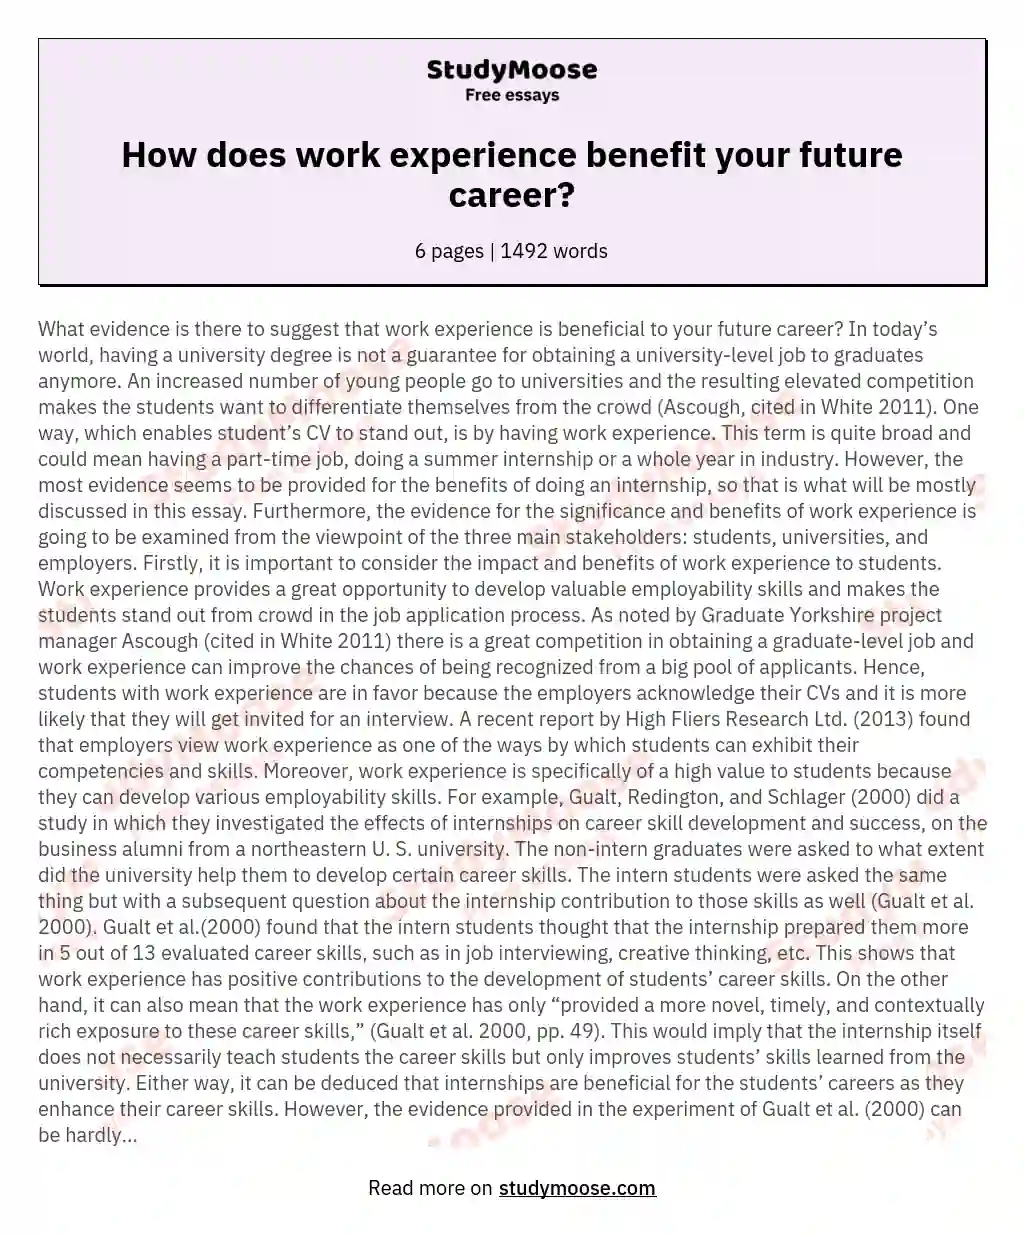 How does work experience benefit your future career?